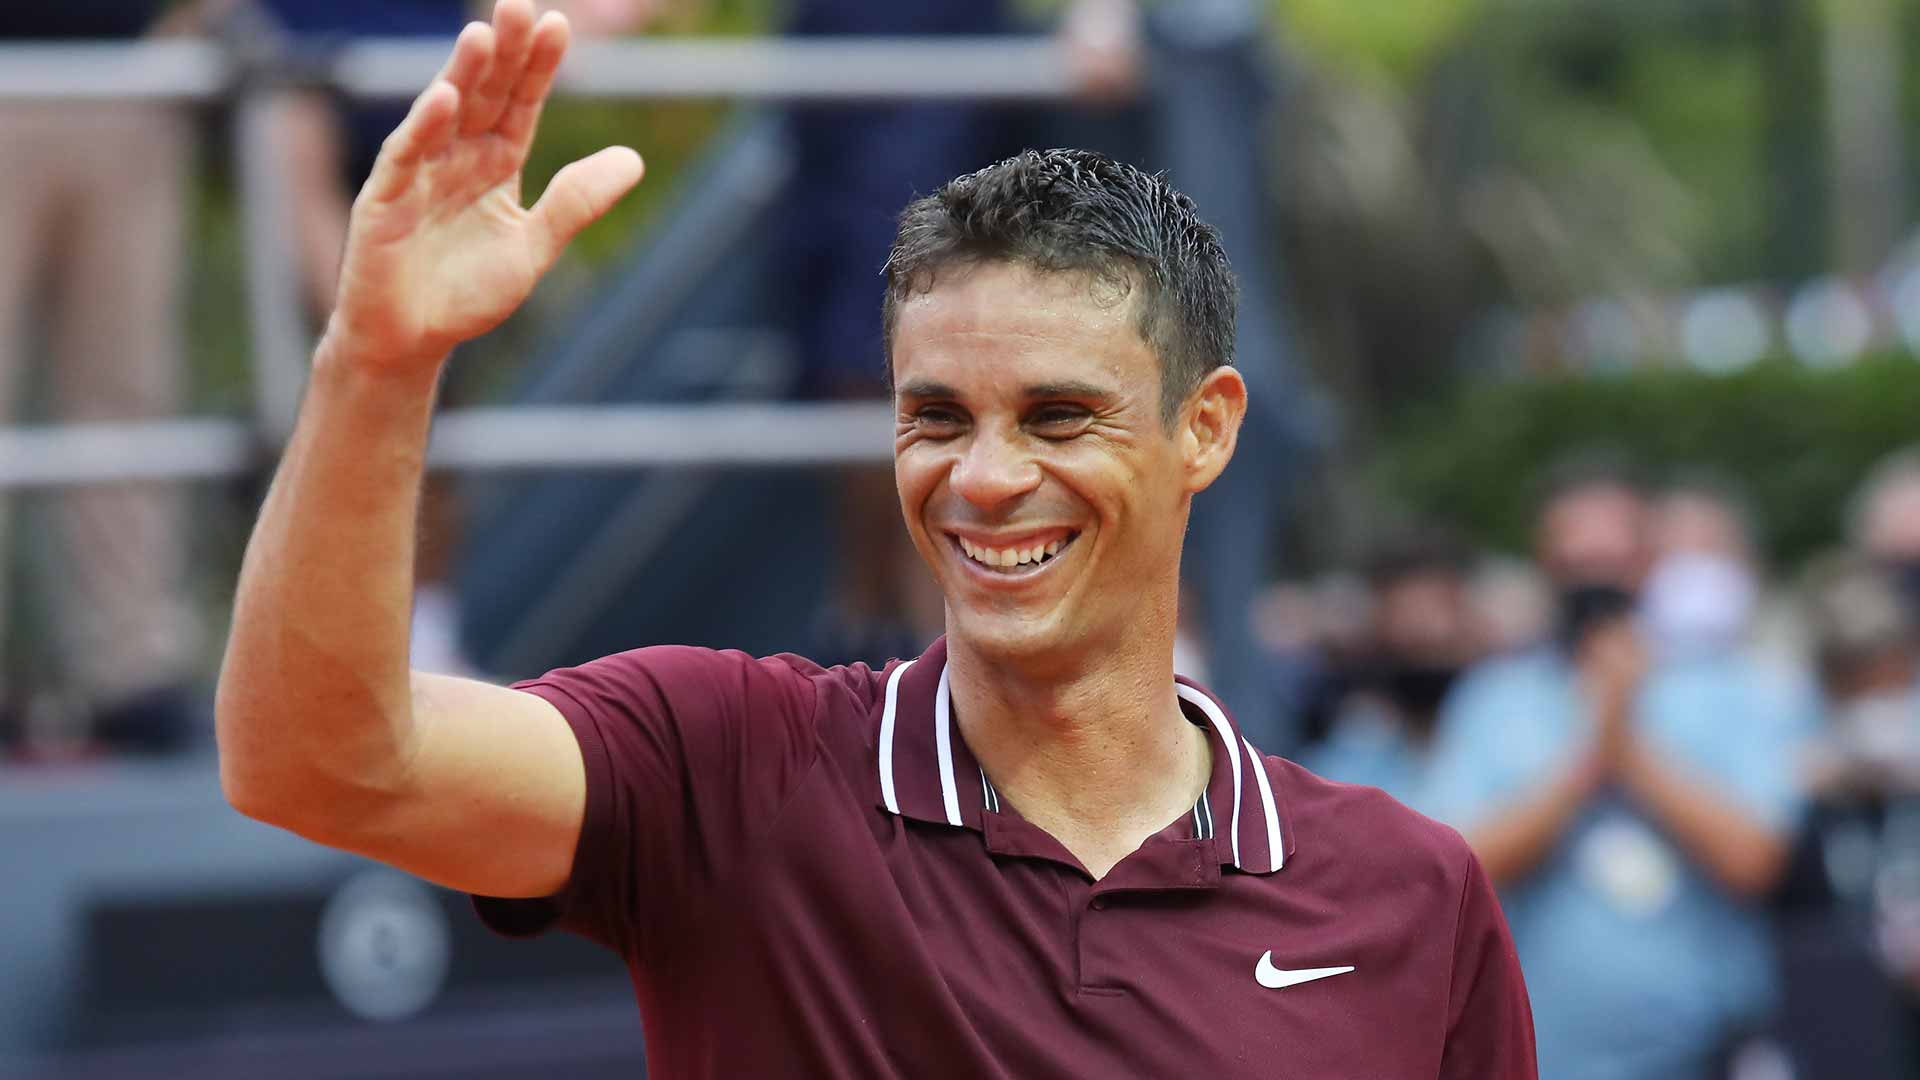 Rogerio Dutra Silva played his final match on Wednesday at the Rio Open presented by Claro.